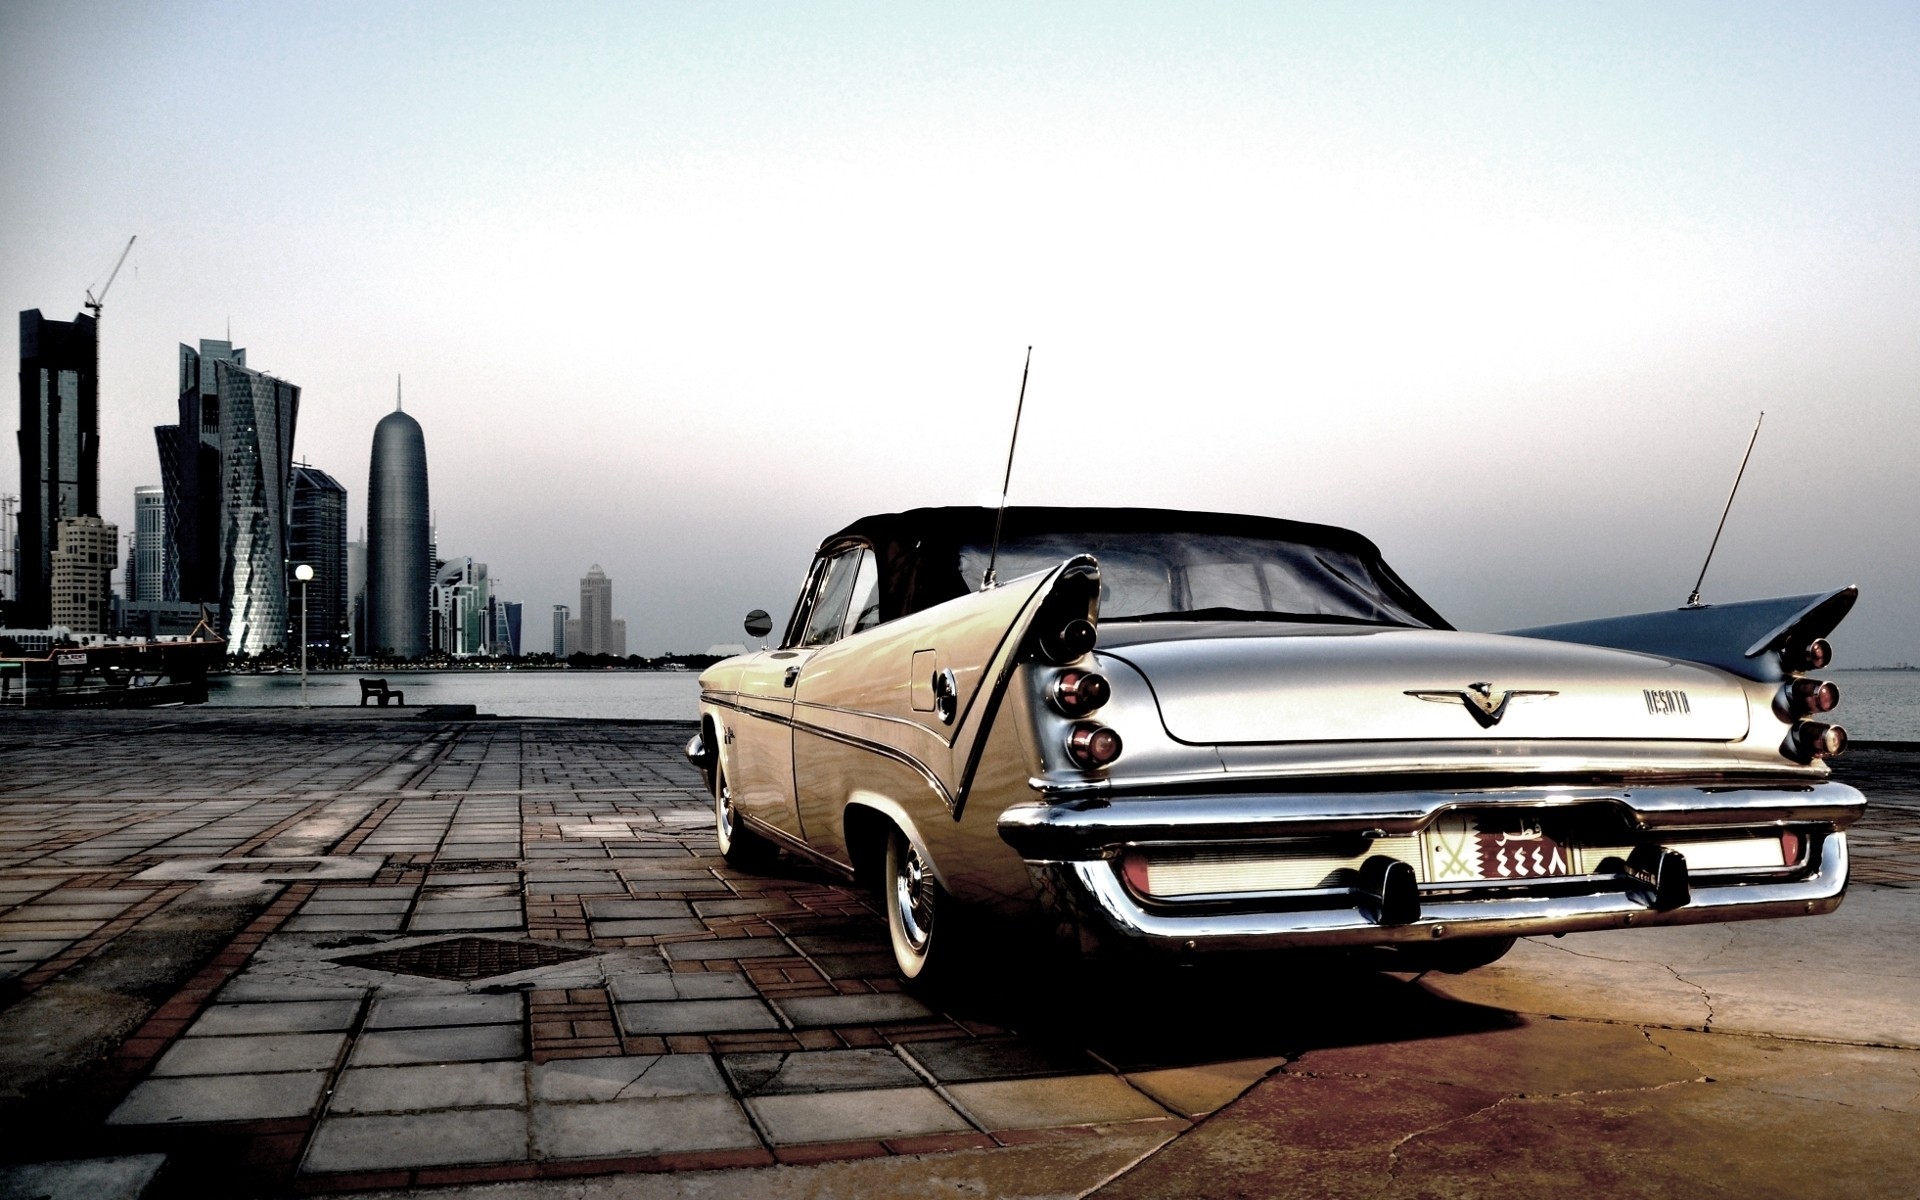 Chrysler 300 old classic car pictures for desktop and wallpaper